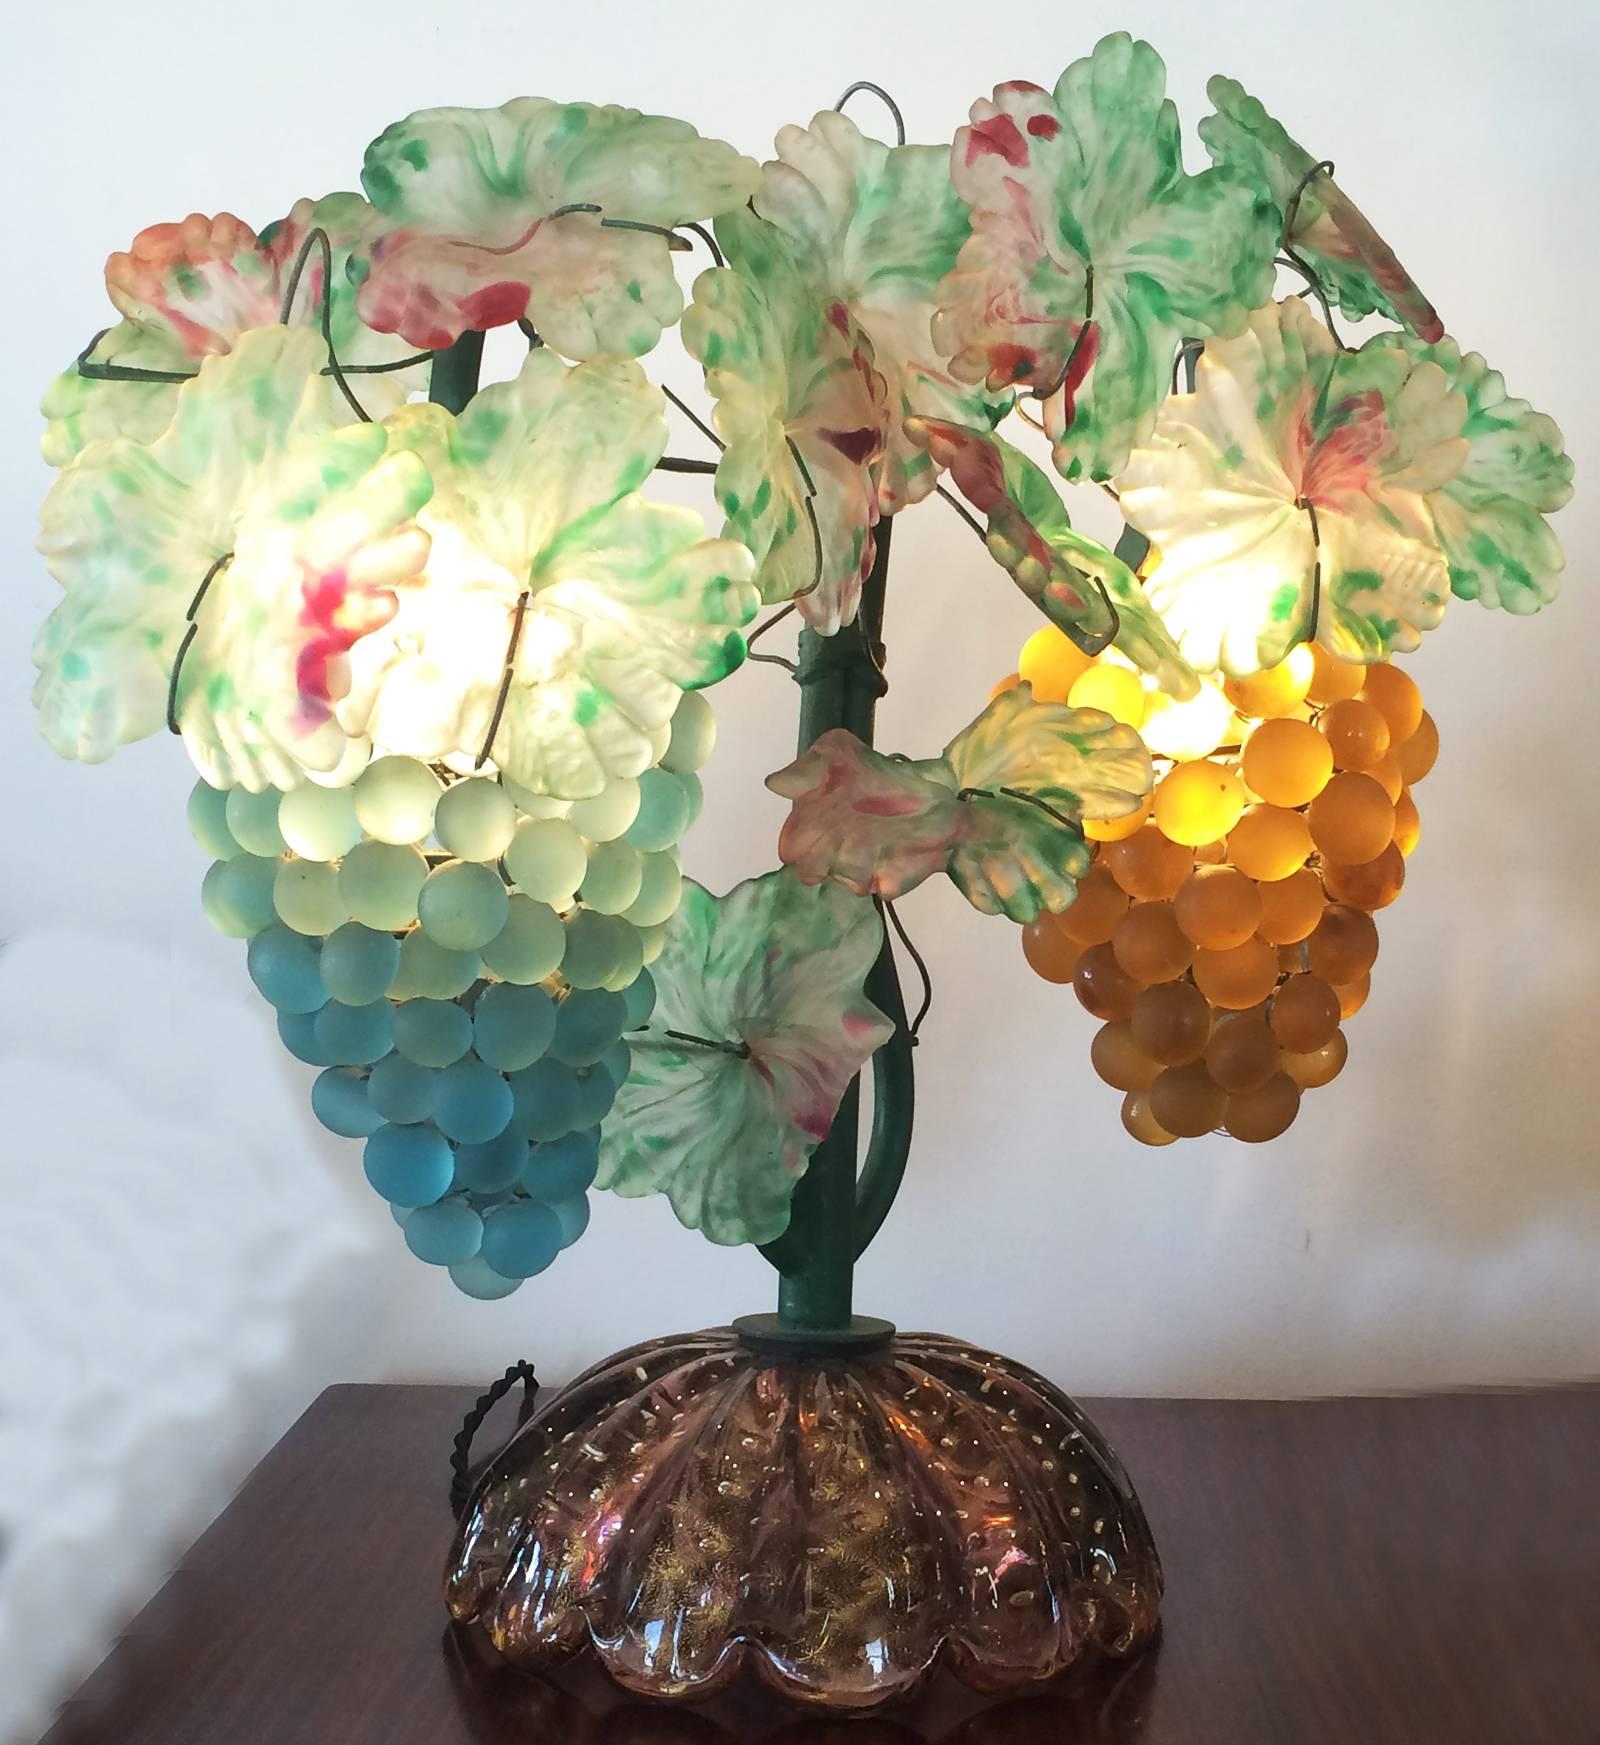 Art Deco rare Murano/Venetian Lamp with two bunches of grapes of two colors, and vine leaves, based on a fluted, domed base with gold detail. Magnificent Art Glass capturing the perfect image of the vine and fruits. Dimensions are approximately :